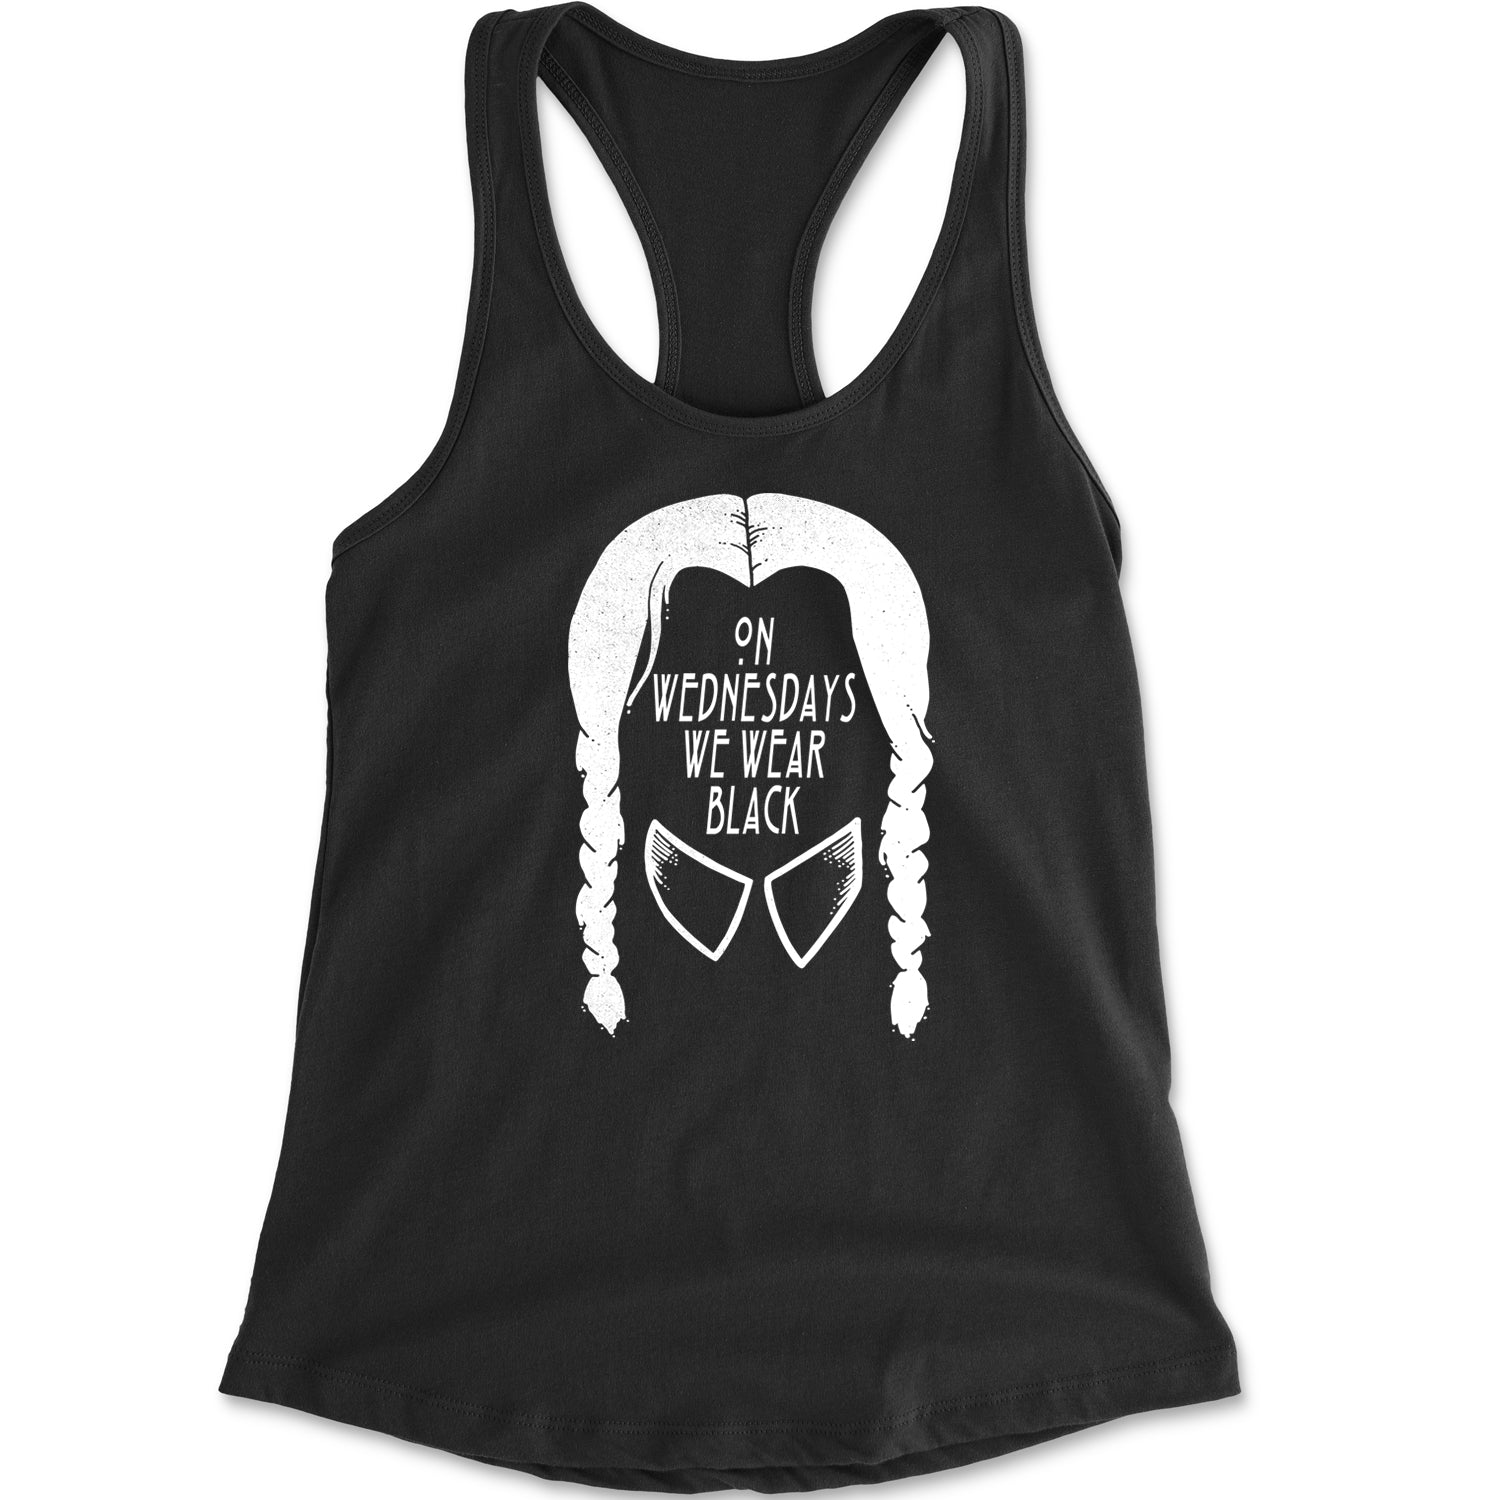 On Wednesdays, We Wear Black Racerback Tank Top for Women addams, family, gomez, morticia, pugsly, ricci, Wednesday by Expression Tees